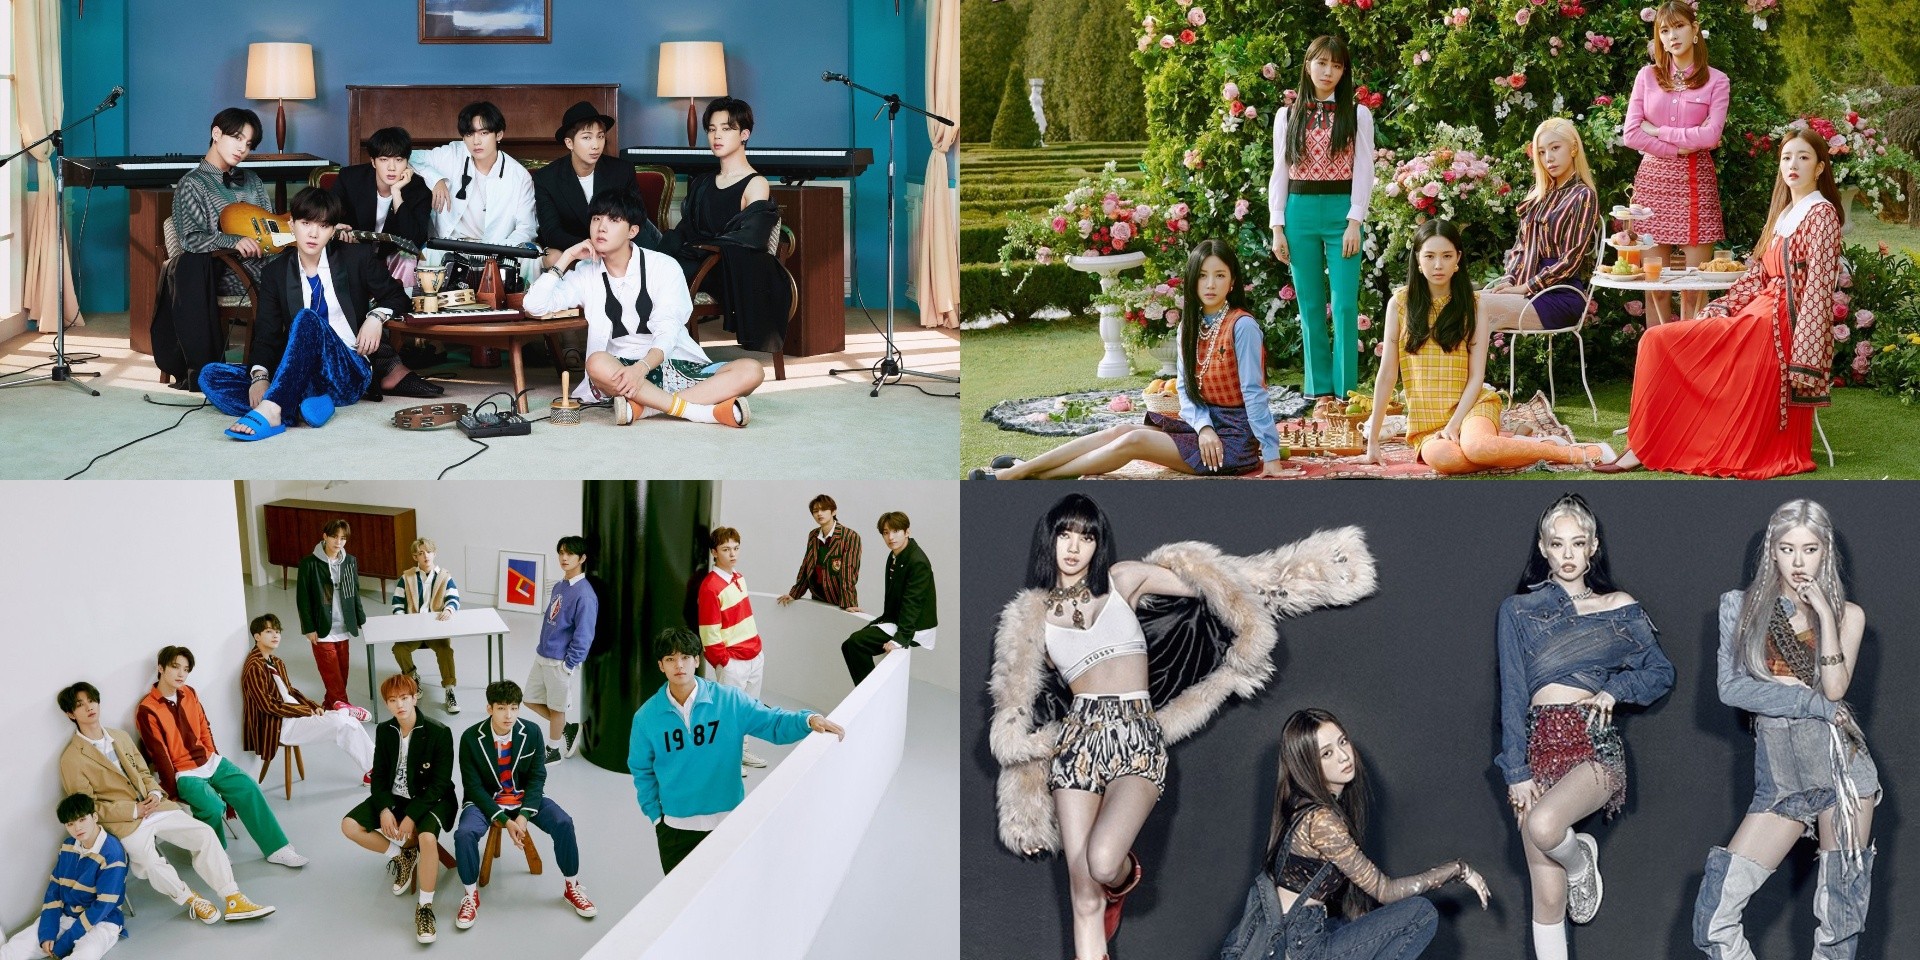 BTS, SEVENTEEN, Apink, BLACKPINK, and more nominated for Melon Music Awards 2020, BTS to perform 